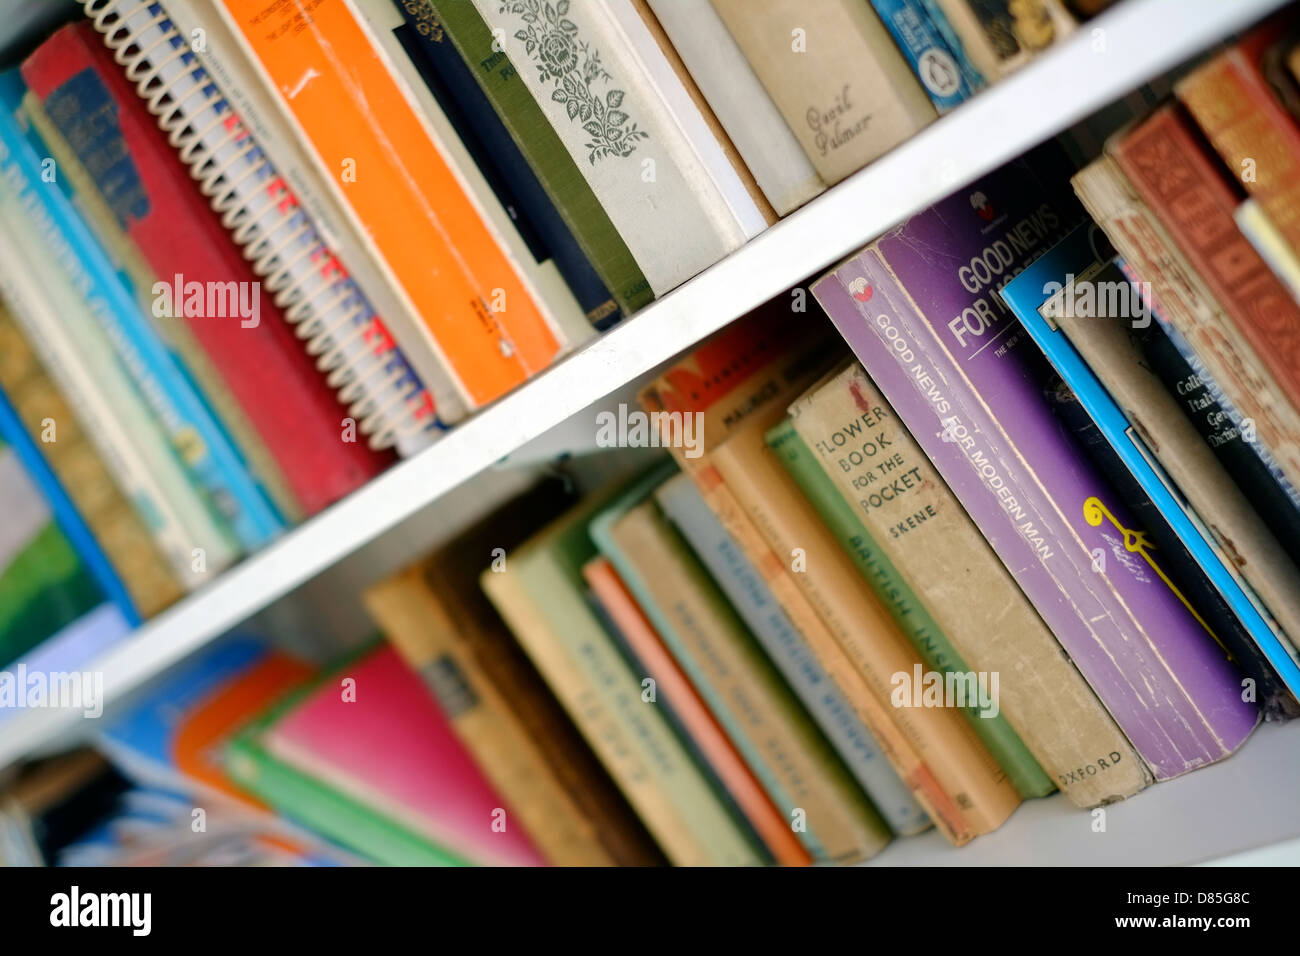 A large selection of books on a book shelf. Stock Photo